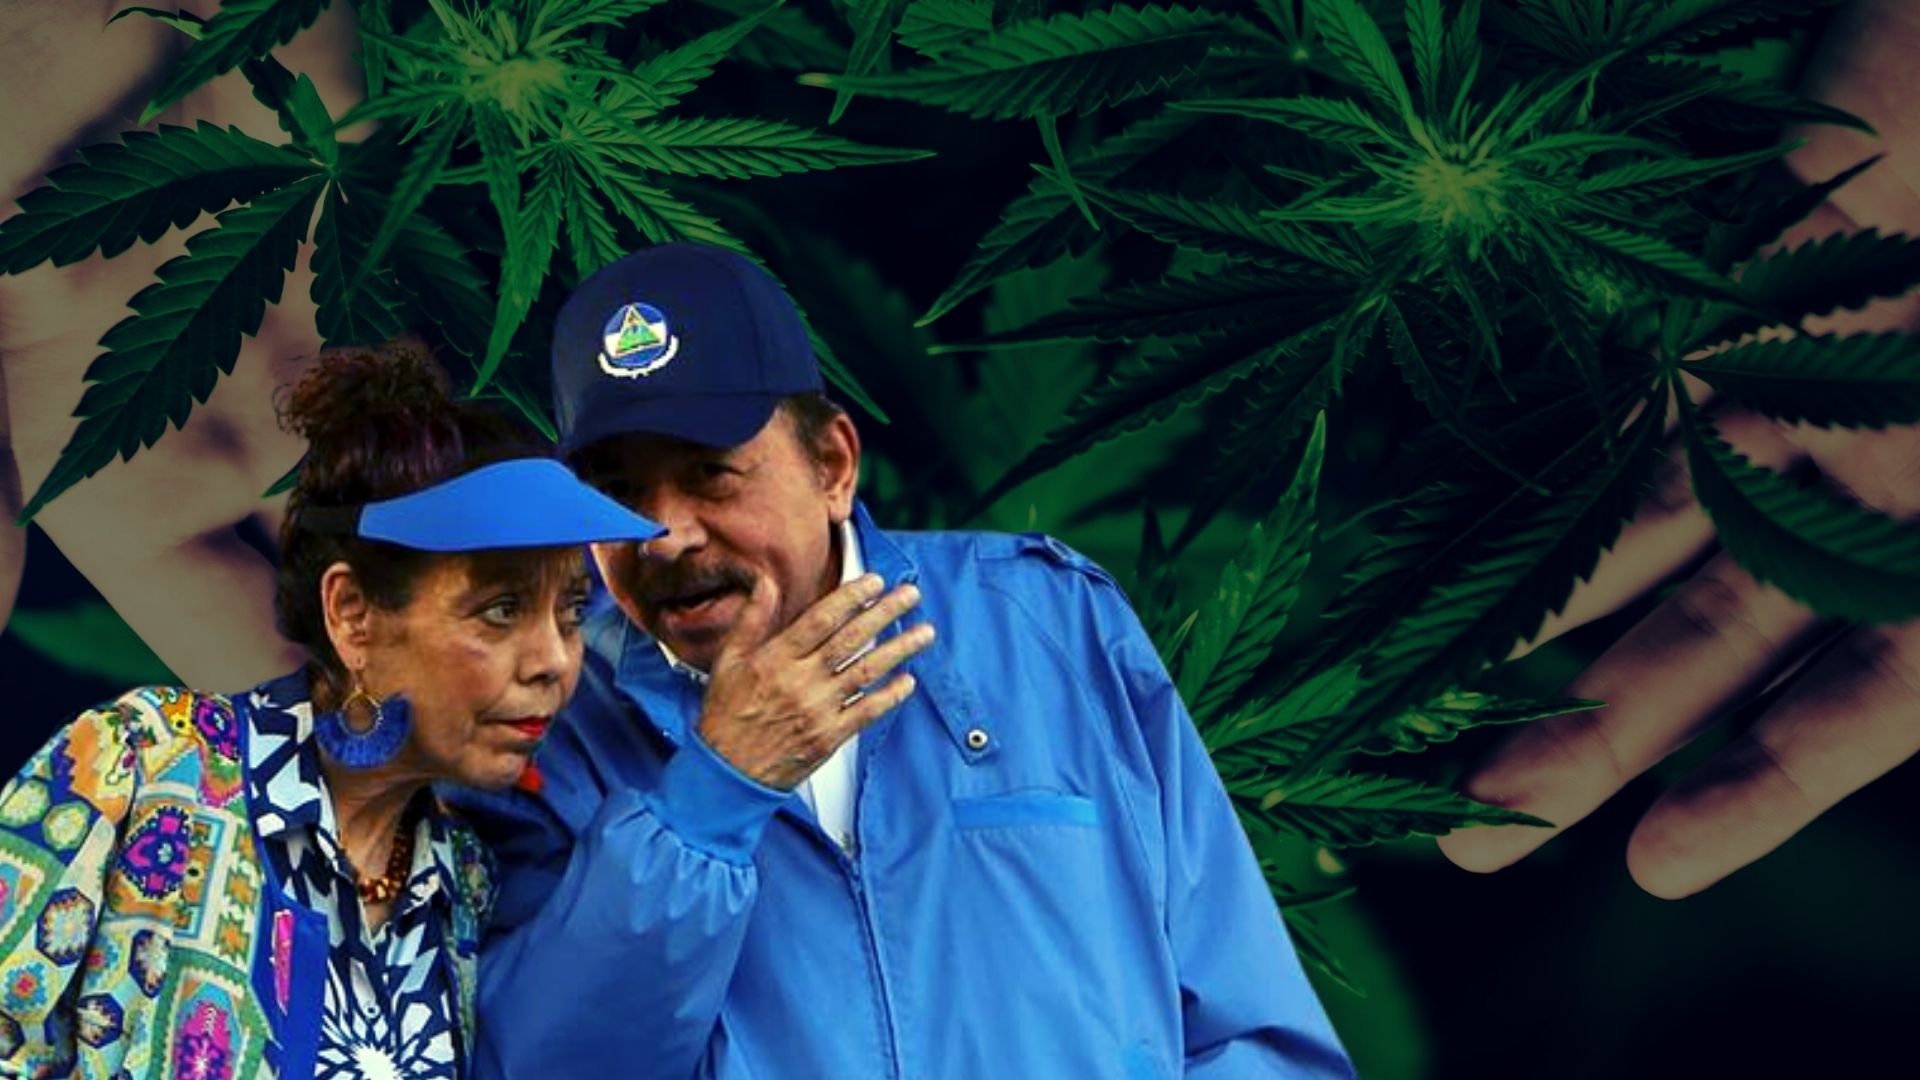 Legalization of marijuana could create a "government cartel" in Nicaragua